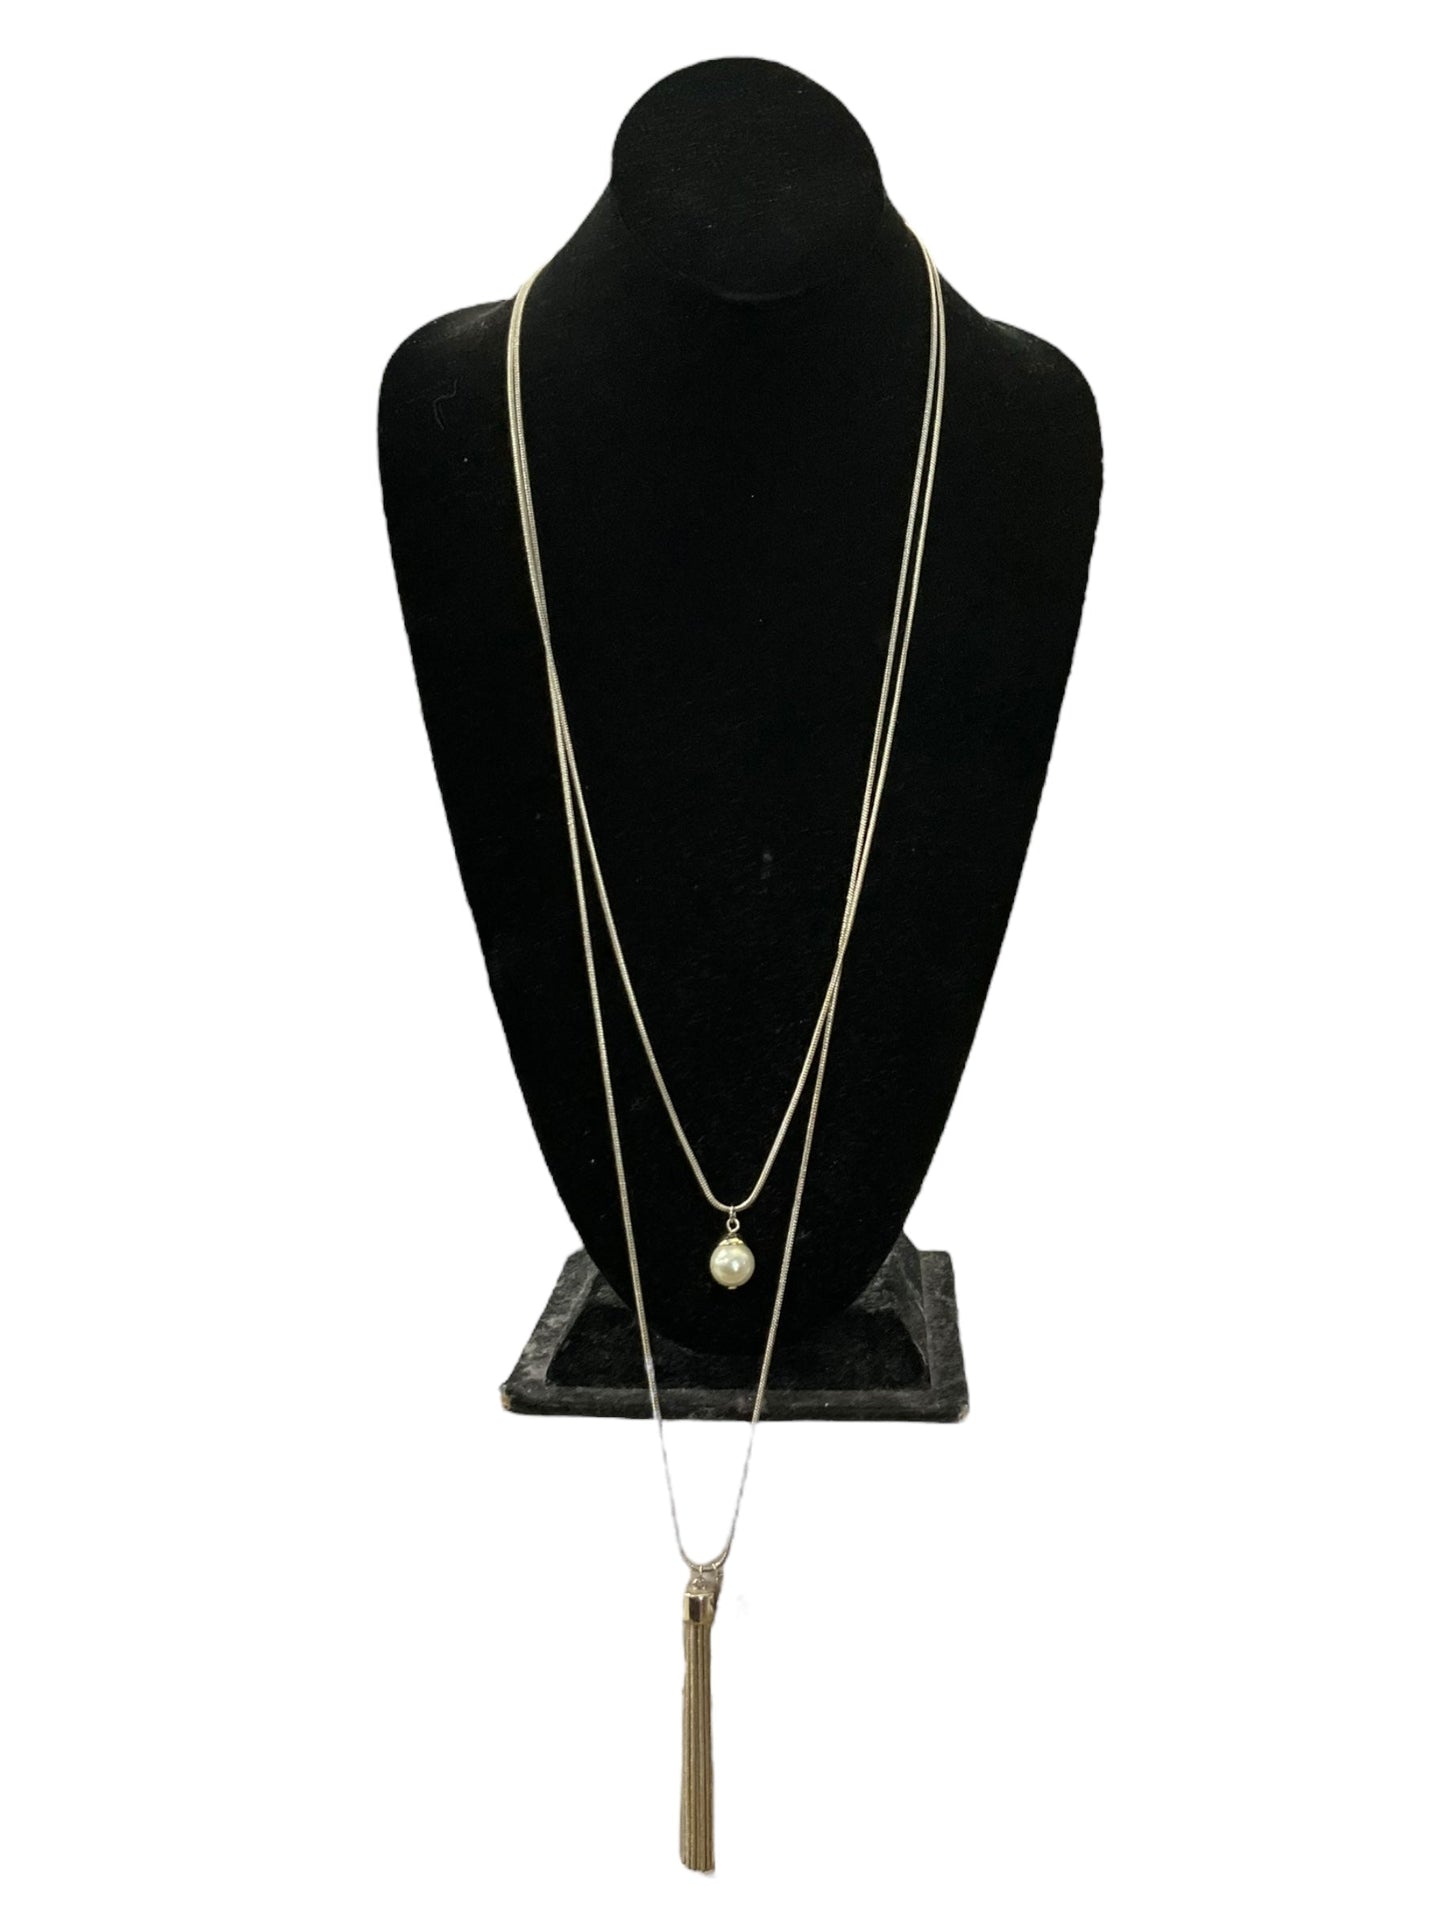 Necklace Layered Clothes Mentor